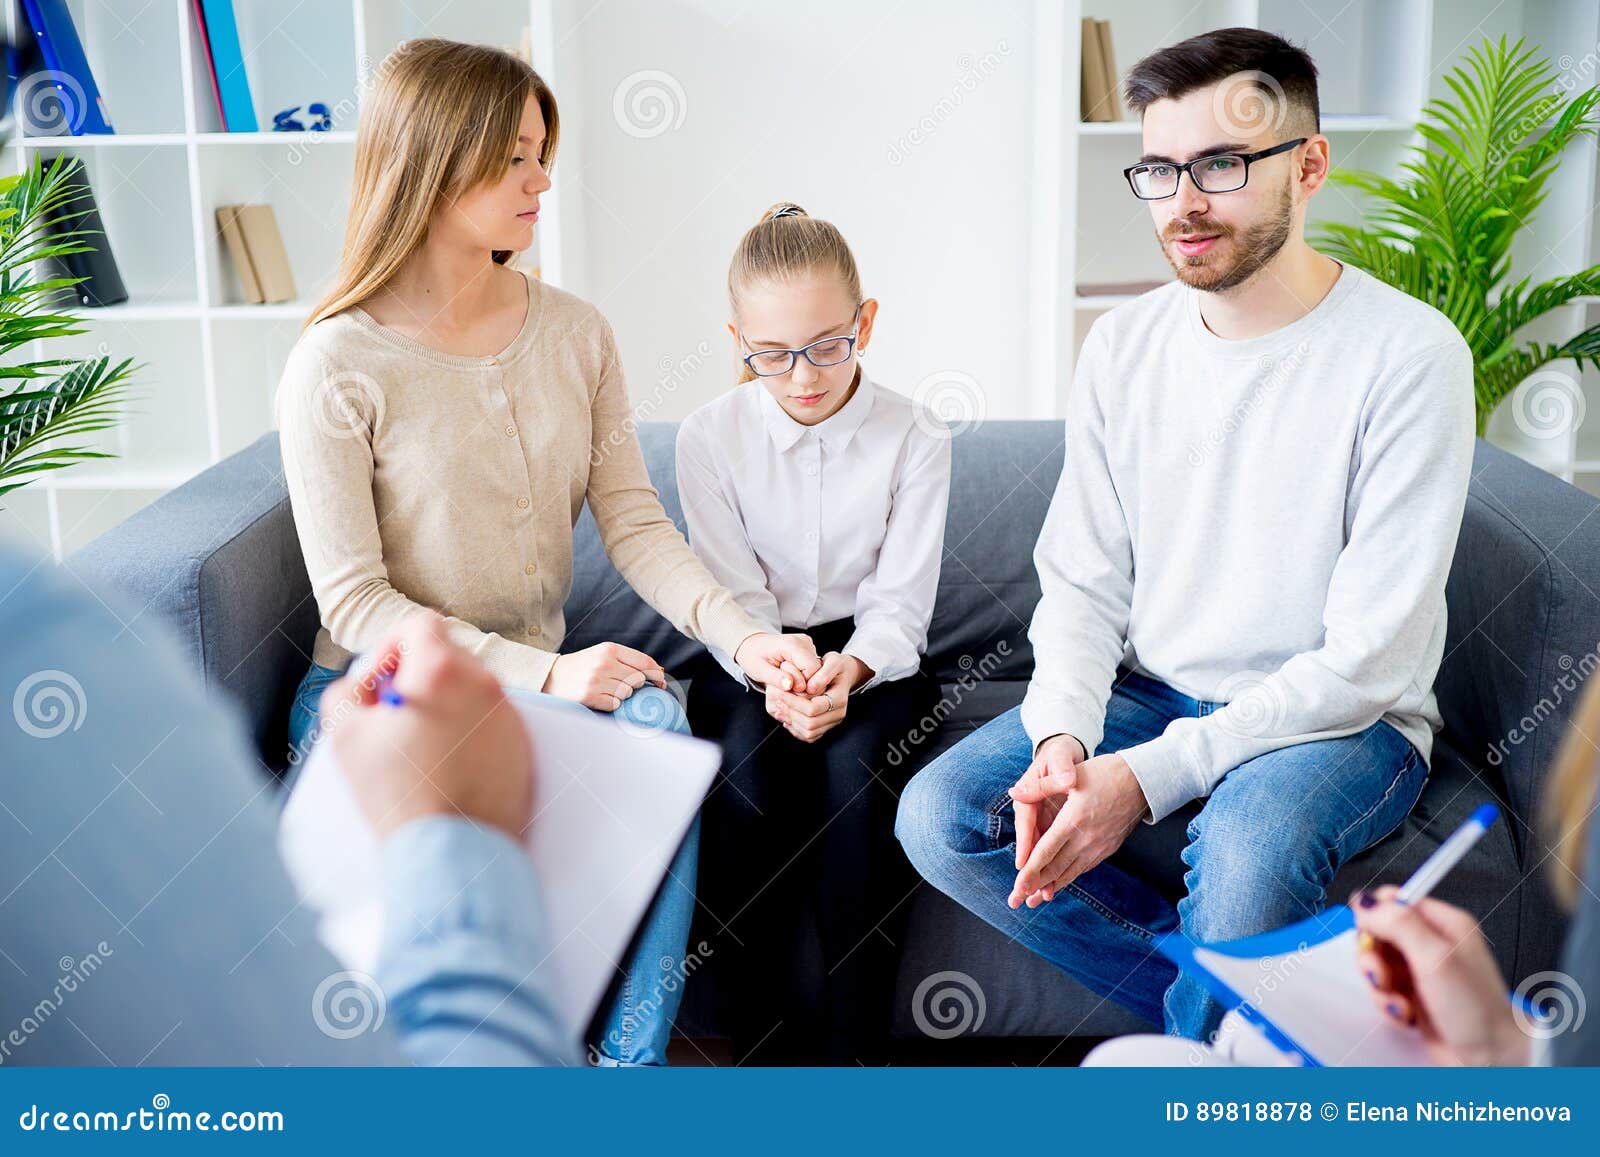 Family with psychologist stock photo. Image of psychiatry - 89818878